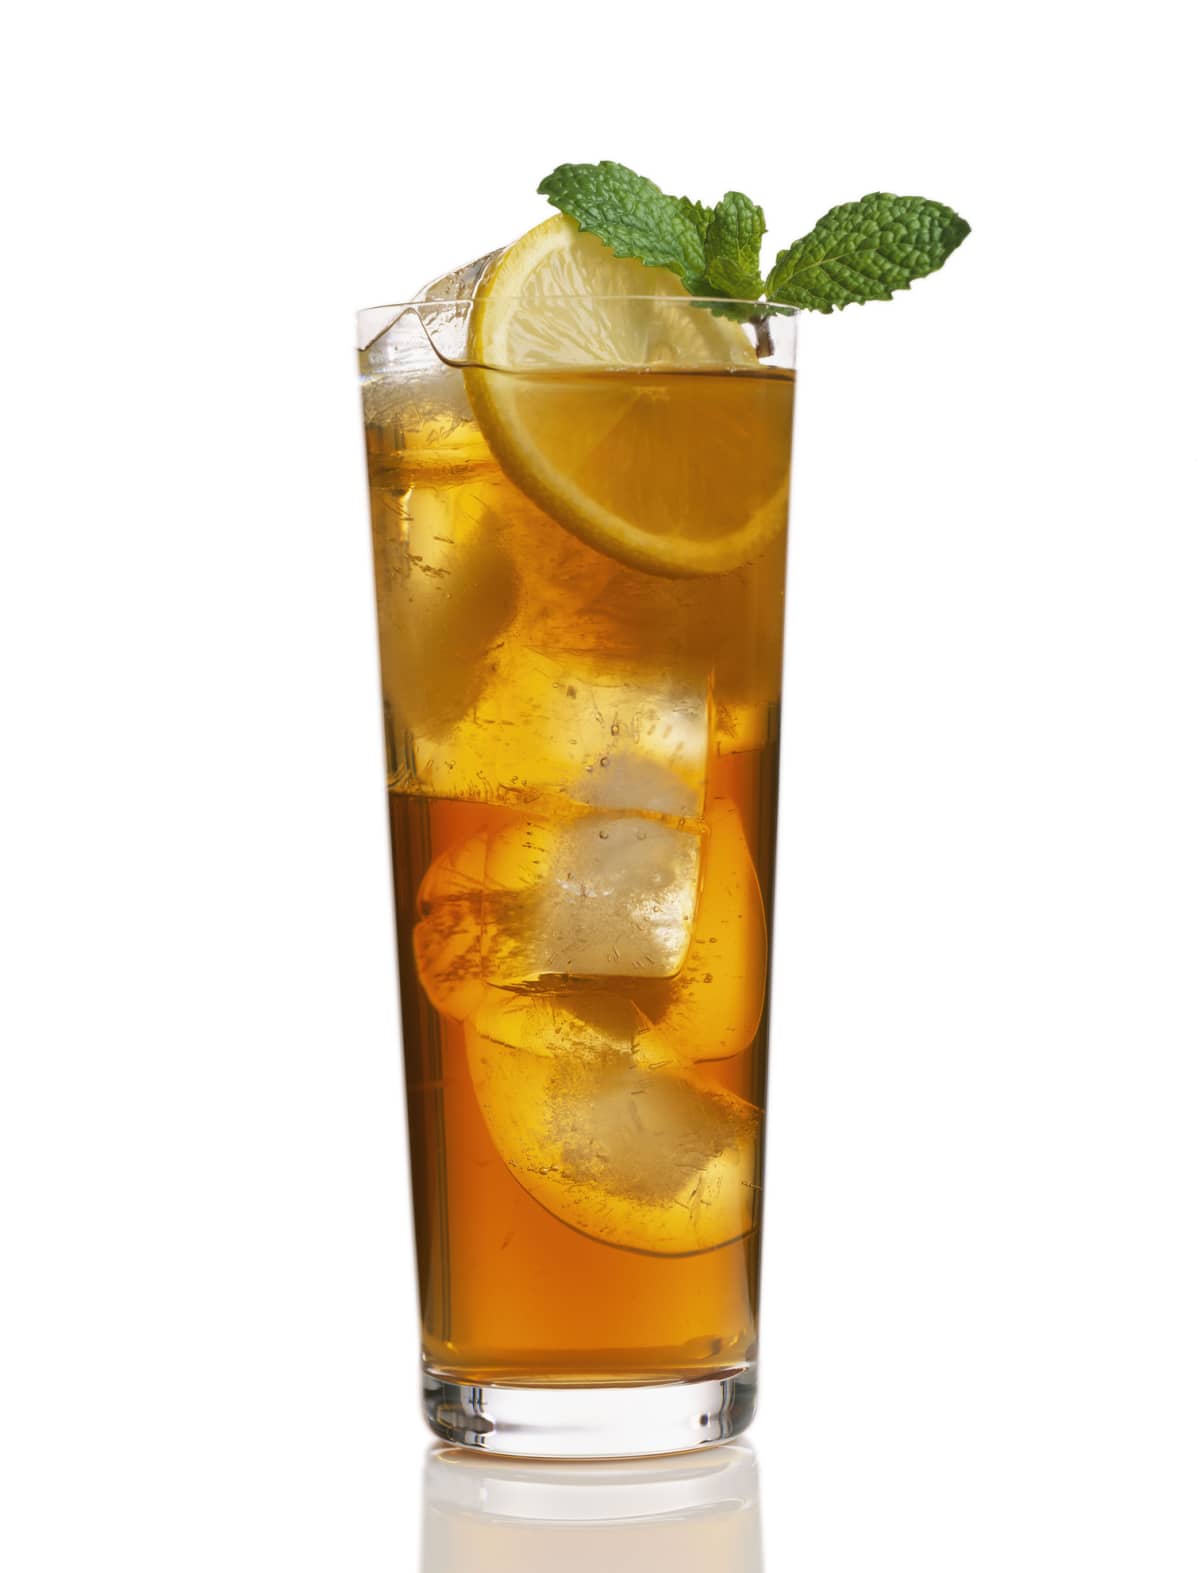 Glass of iced tea with lemon slice and green garnish on white background